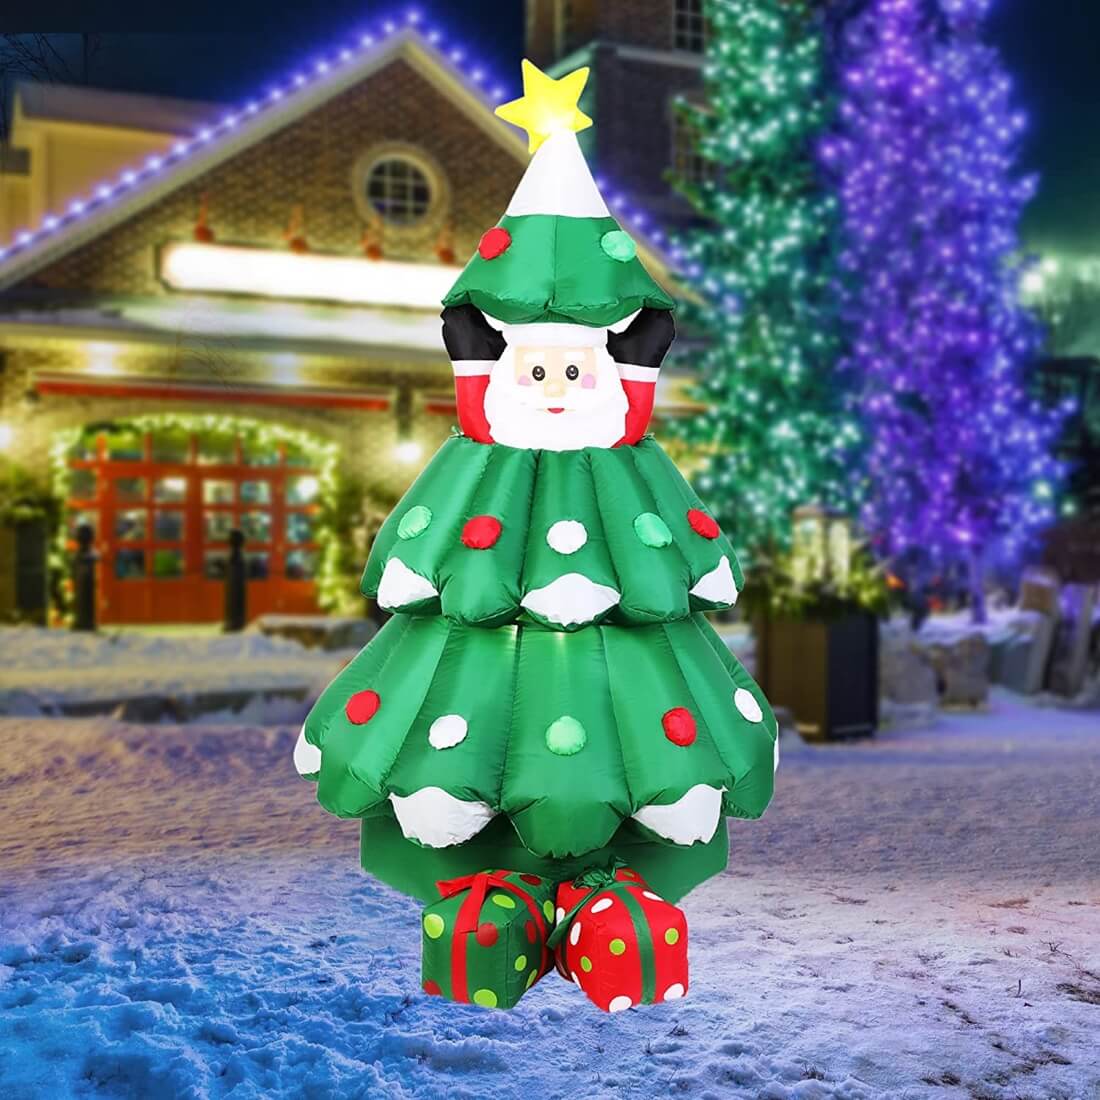 VIVOHOME 6ft Height Inflatable LED Lighted Christmas Tree with Pop up Santa and 2 Gift Boxes Blow up Outdoor Yard Decoration